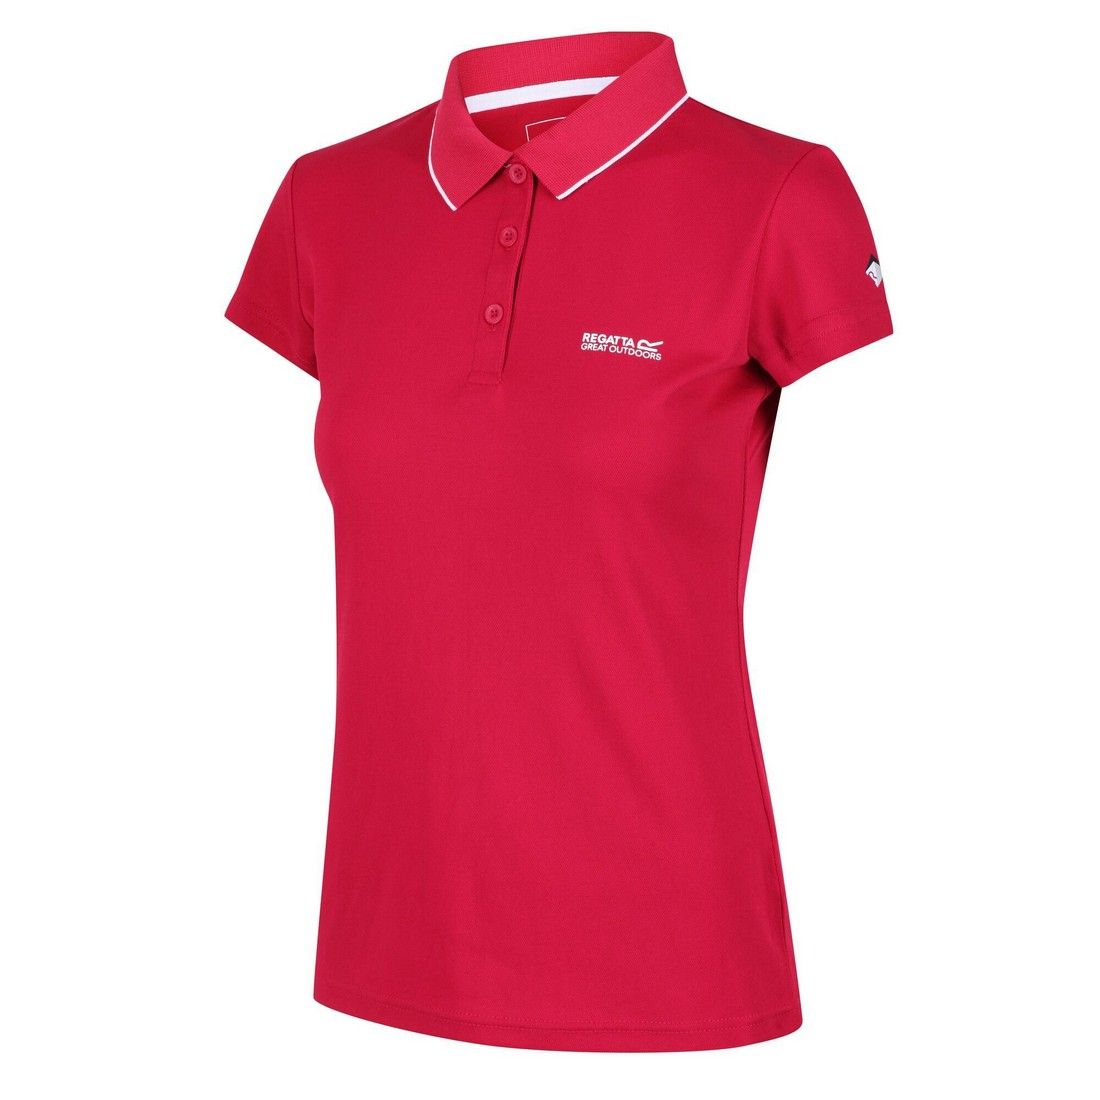 Material: 100% quick dry polyester pique fabric. Ribbed collar. Good wicking performance. 3 button placket.